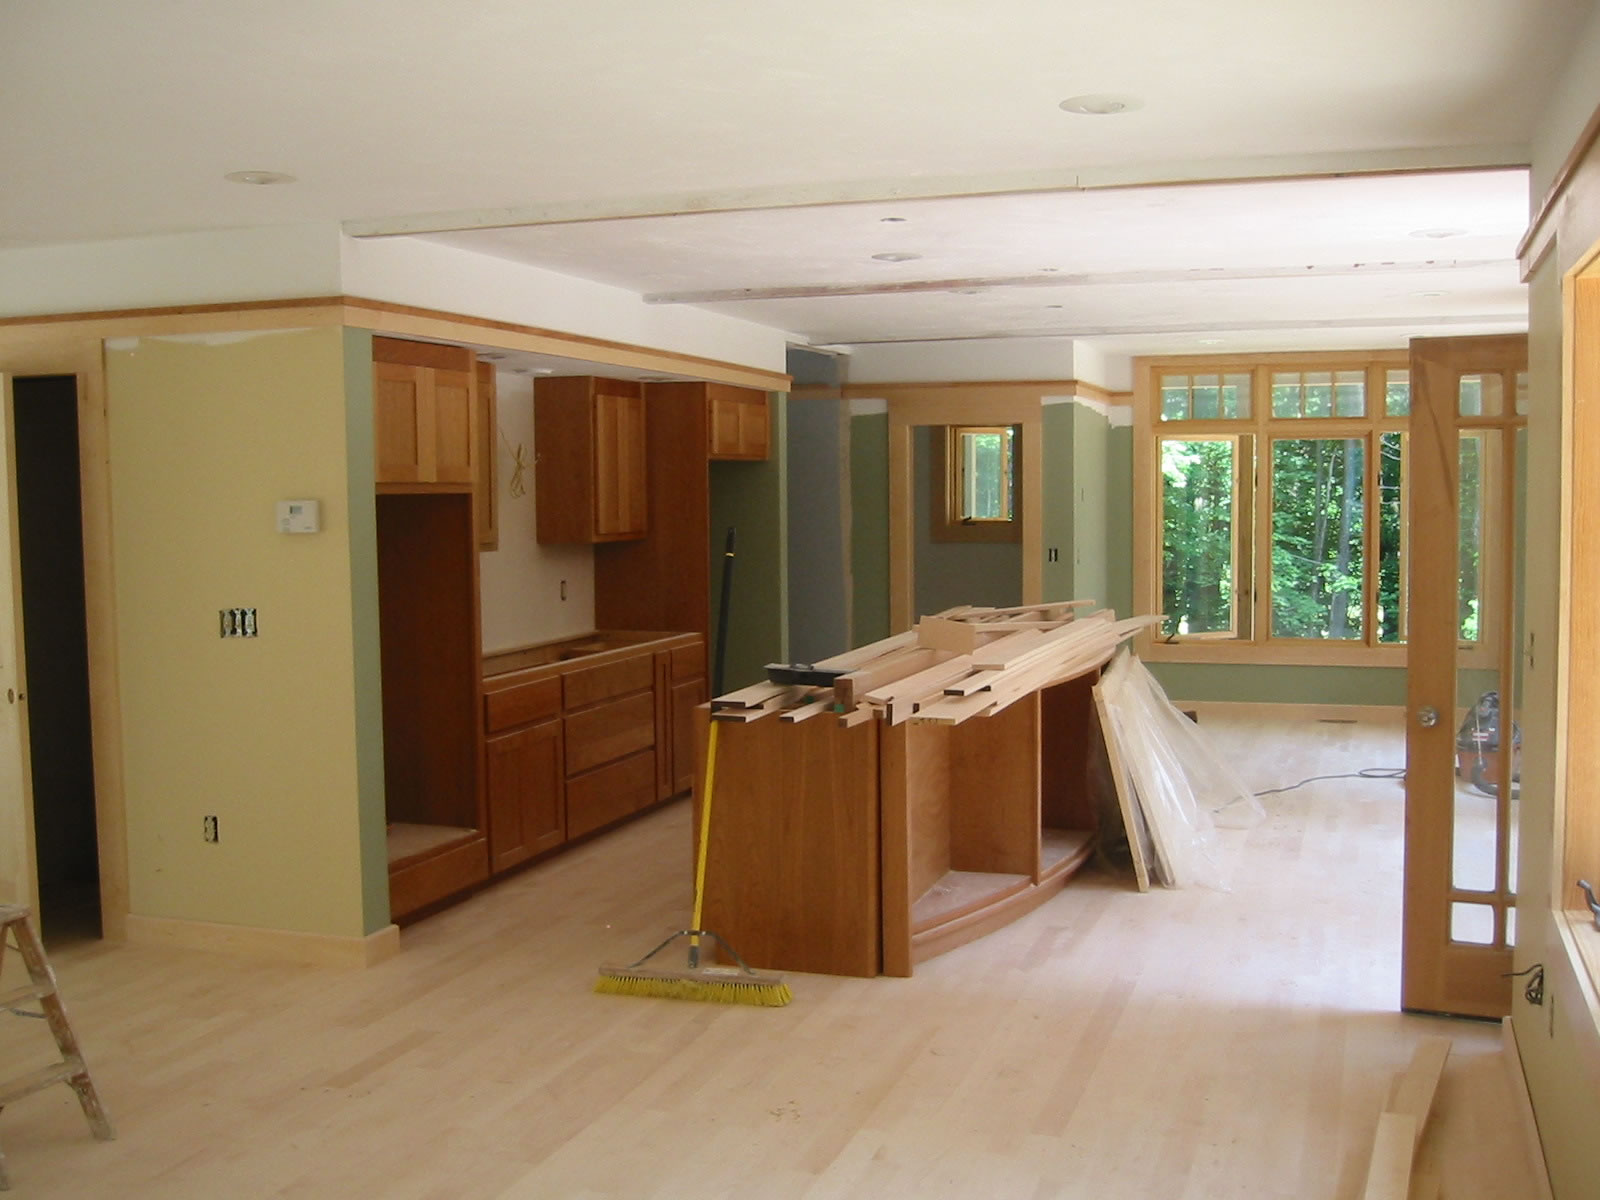 Trim continues | This New House: The maple forest house plan ...